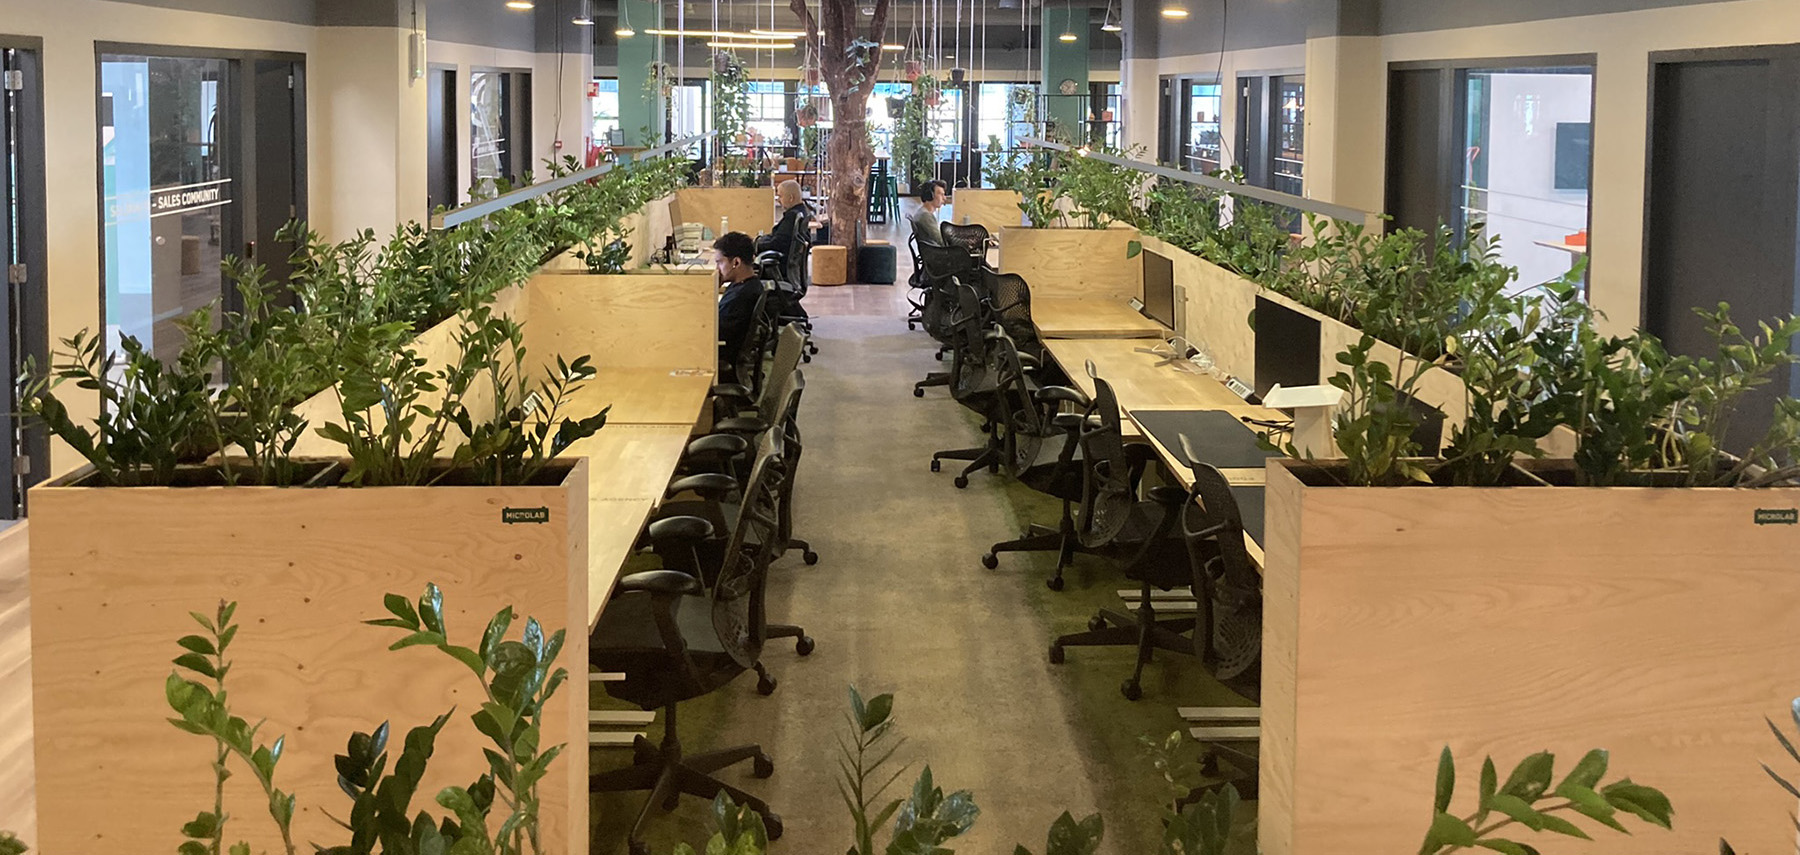 In an office, numerous plants line the backs of workstations. 